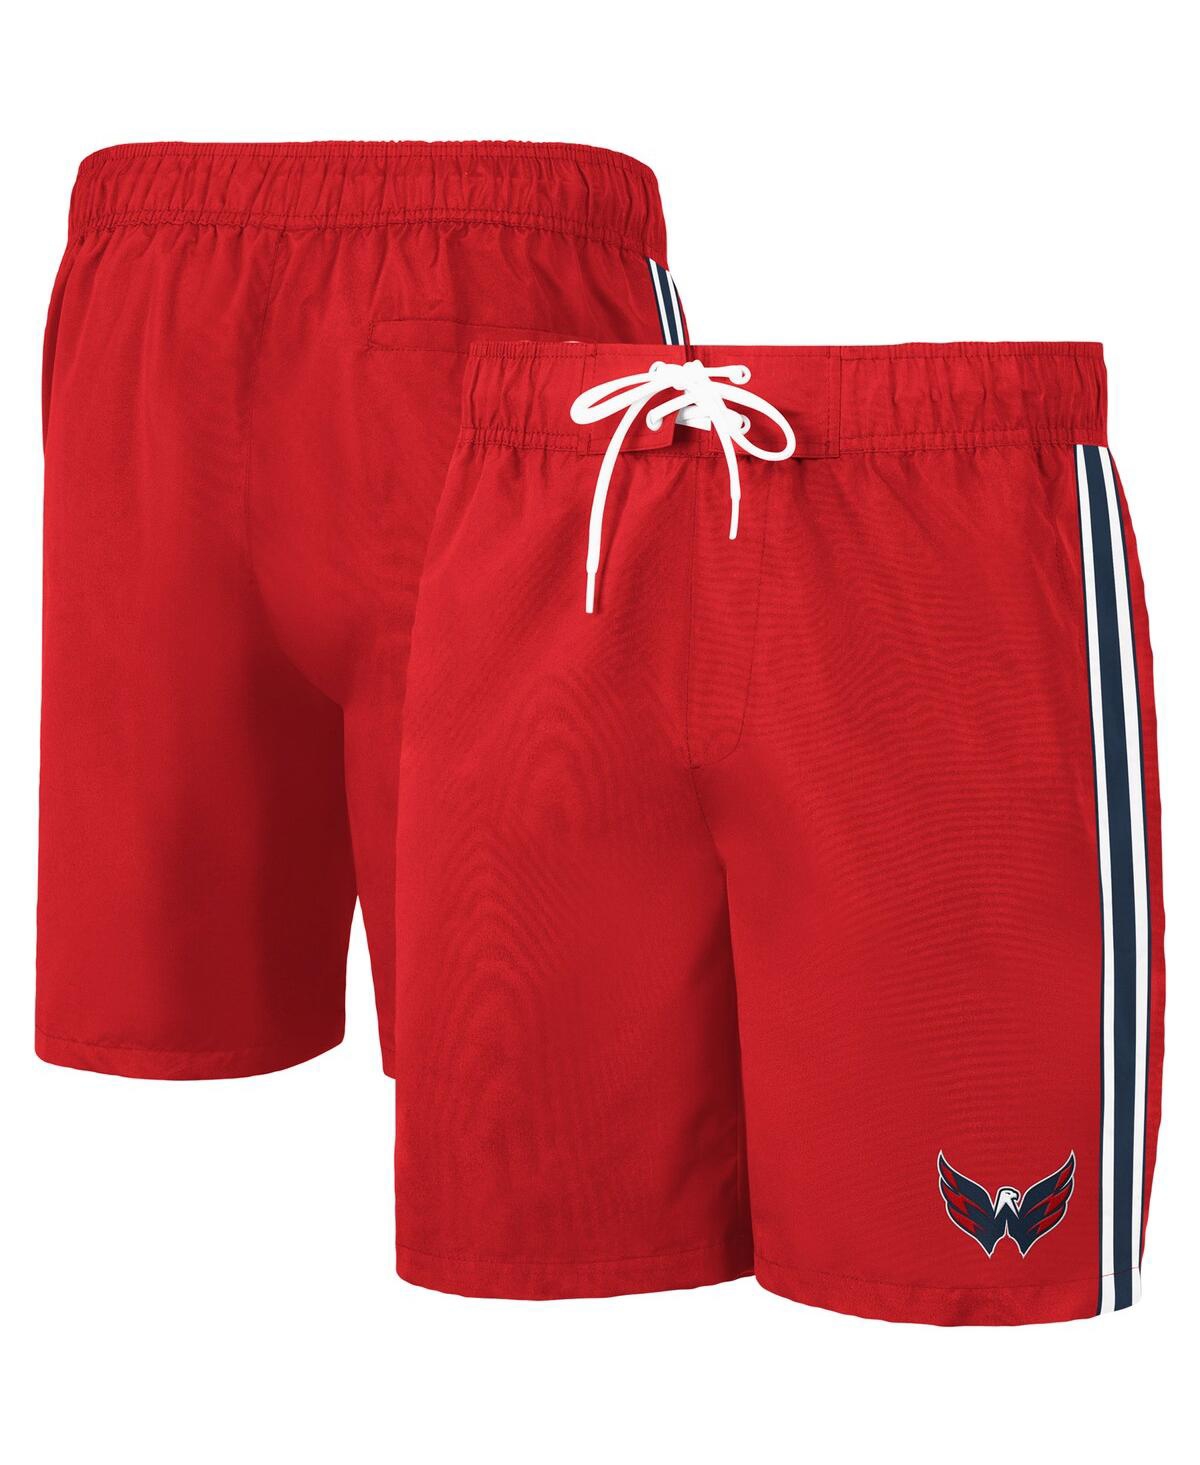 Men's G-iii Sports by Carl Banks Red and Navy Washington Capitals Sand Beach Swim Shorts - Red, Navy